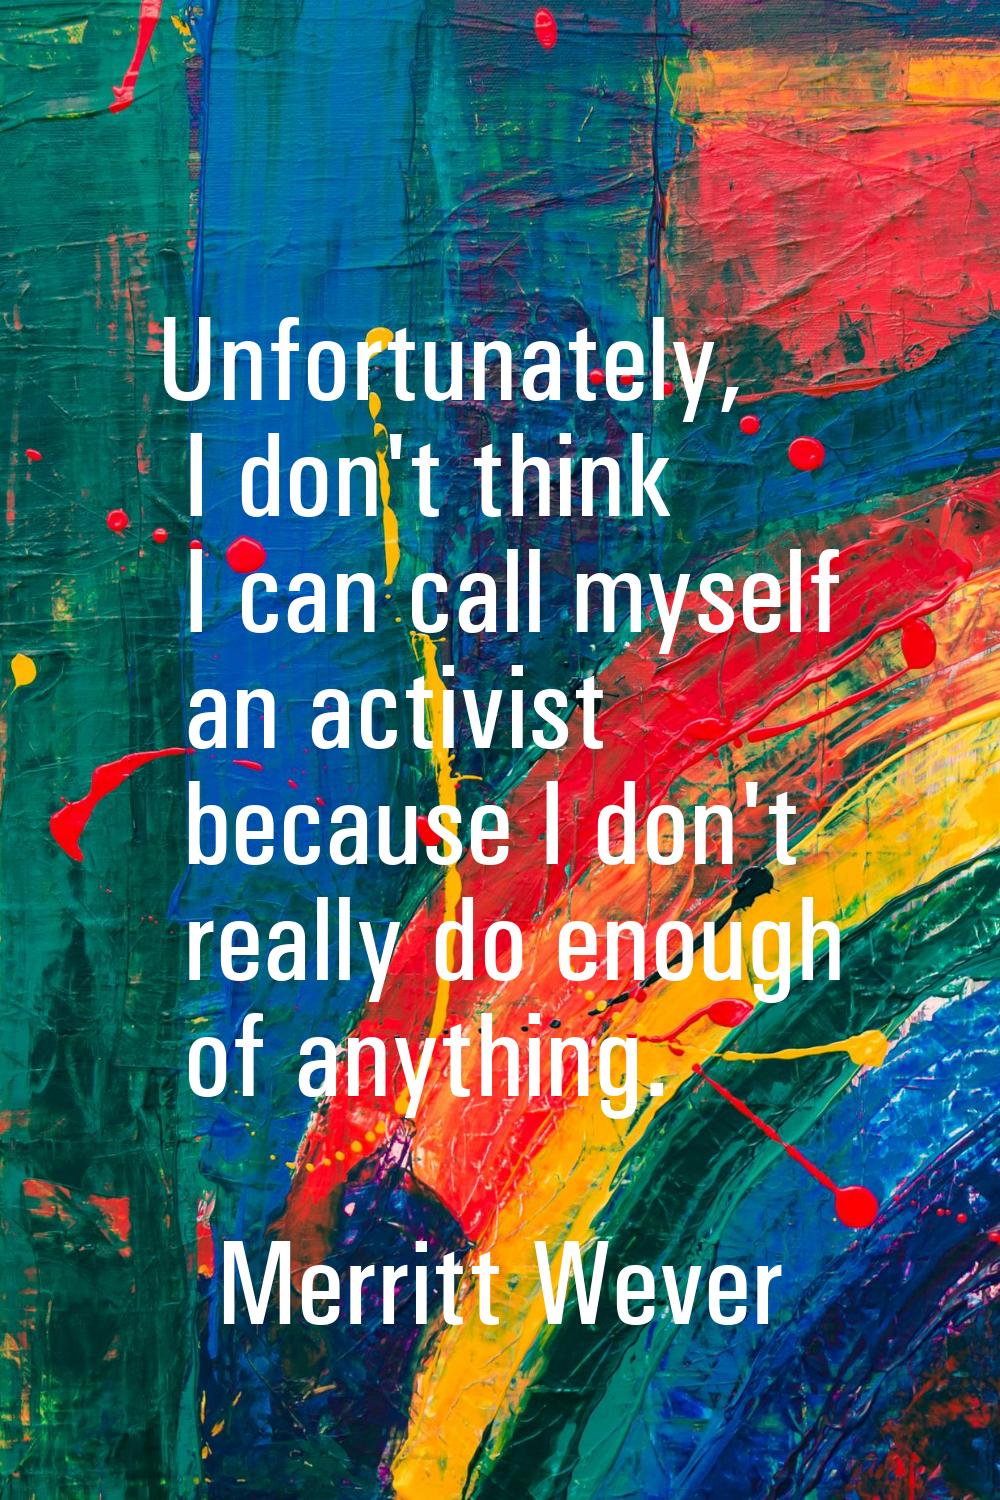 Unfortunately, I don't think I can call myself an activist because I don't really do enough of anyt